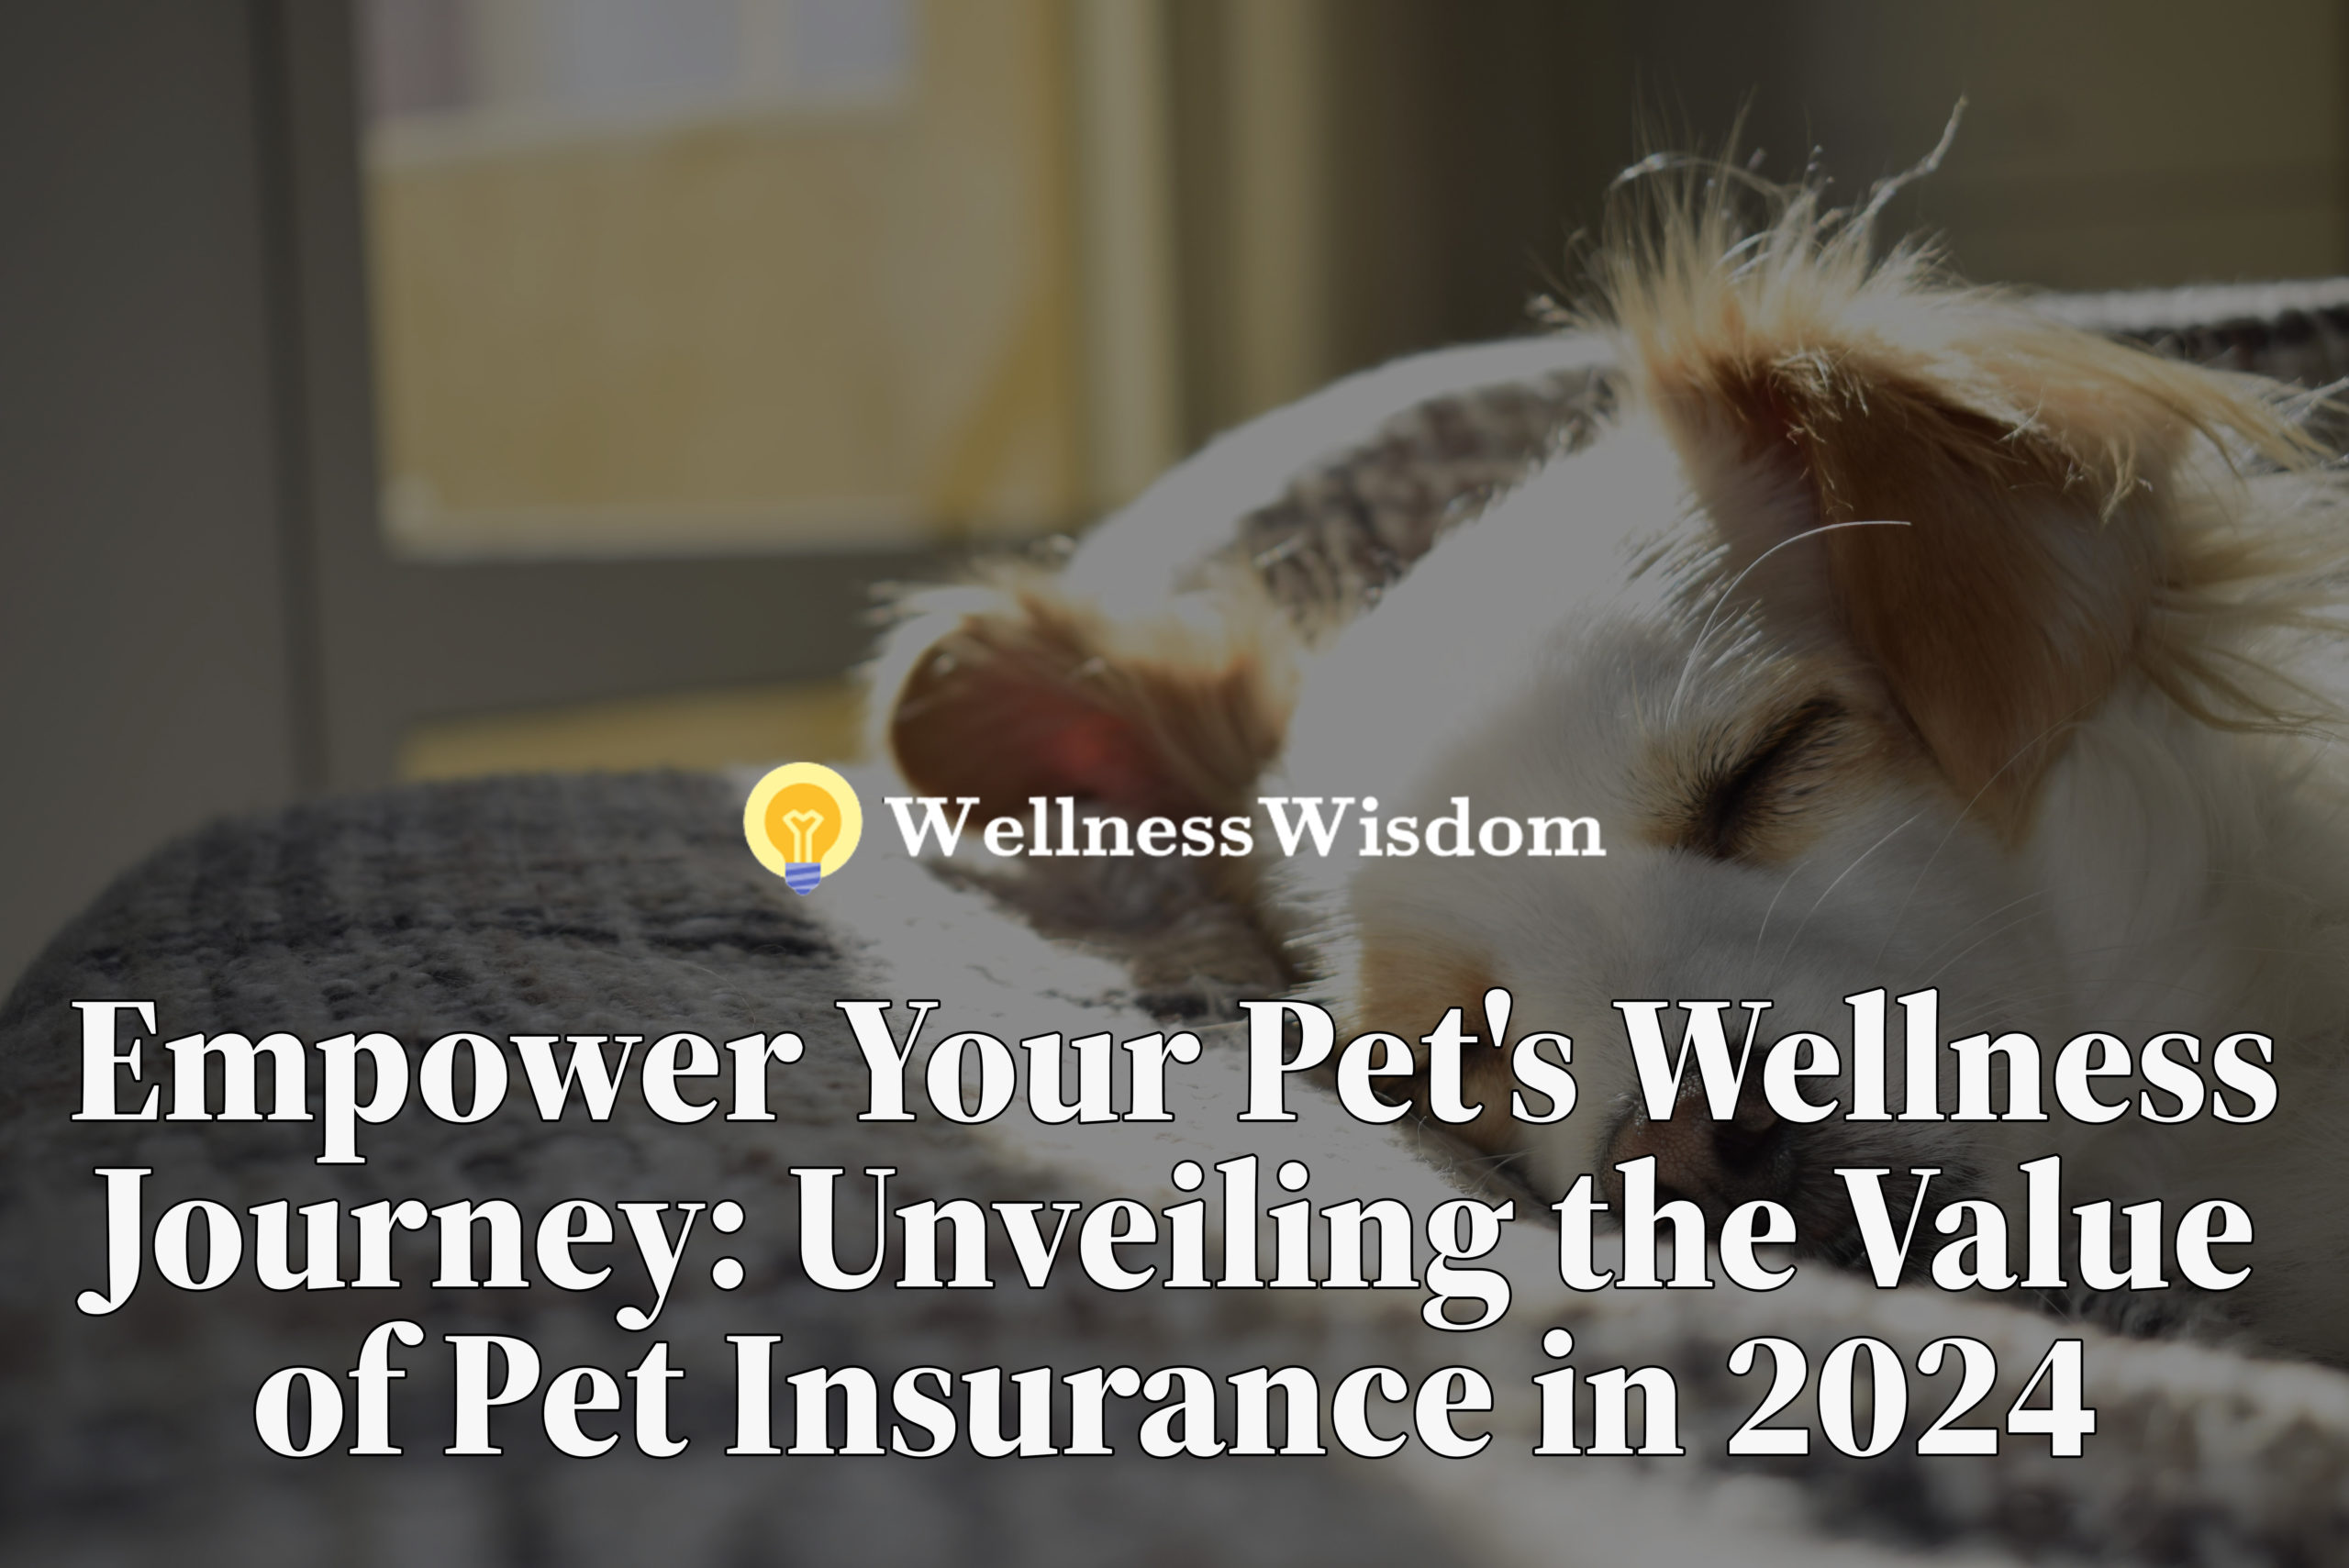 Pet insurance, Veterinary care, Pet healthcare, Financial protection, Peace of mind, Preventive care, Emergency expenses, Pet wellness, Animal health, Insurance coverage, Pet ownership, Pet expenses, Quality care, Pet safety, Lifetime coverage